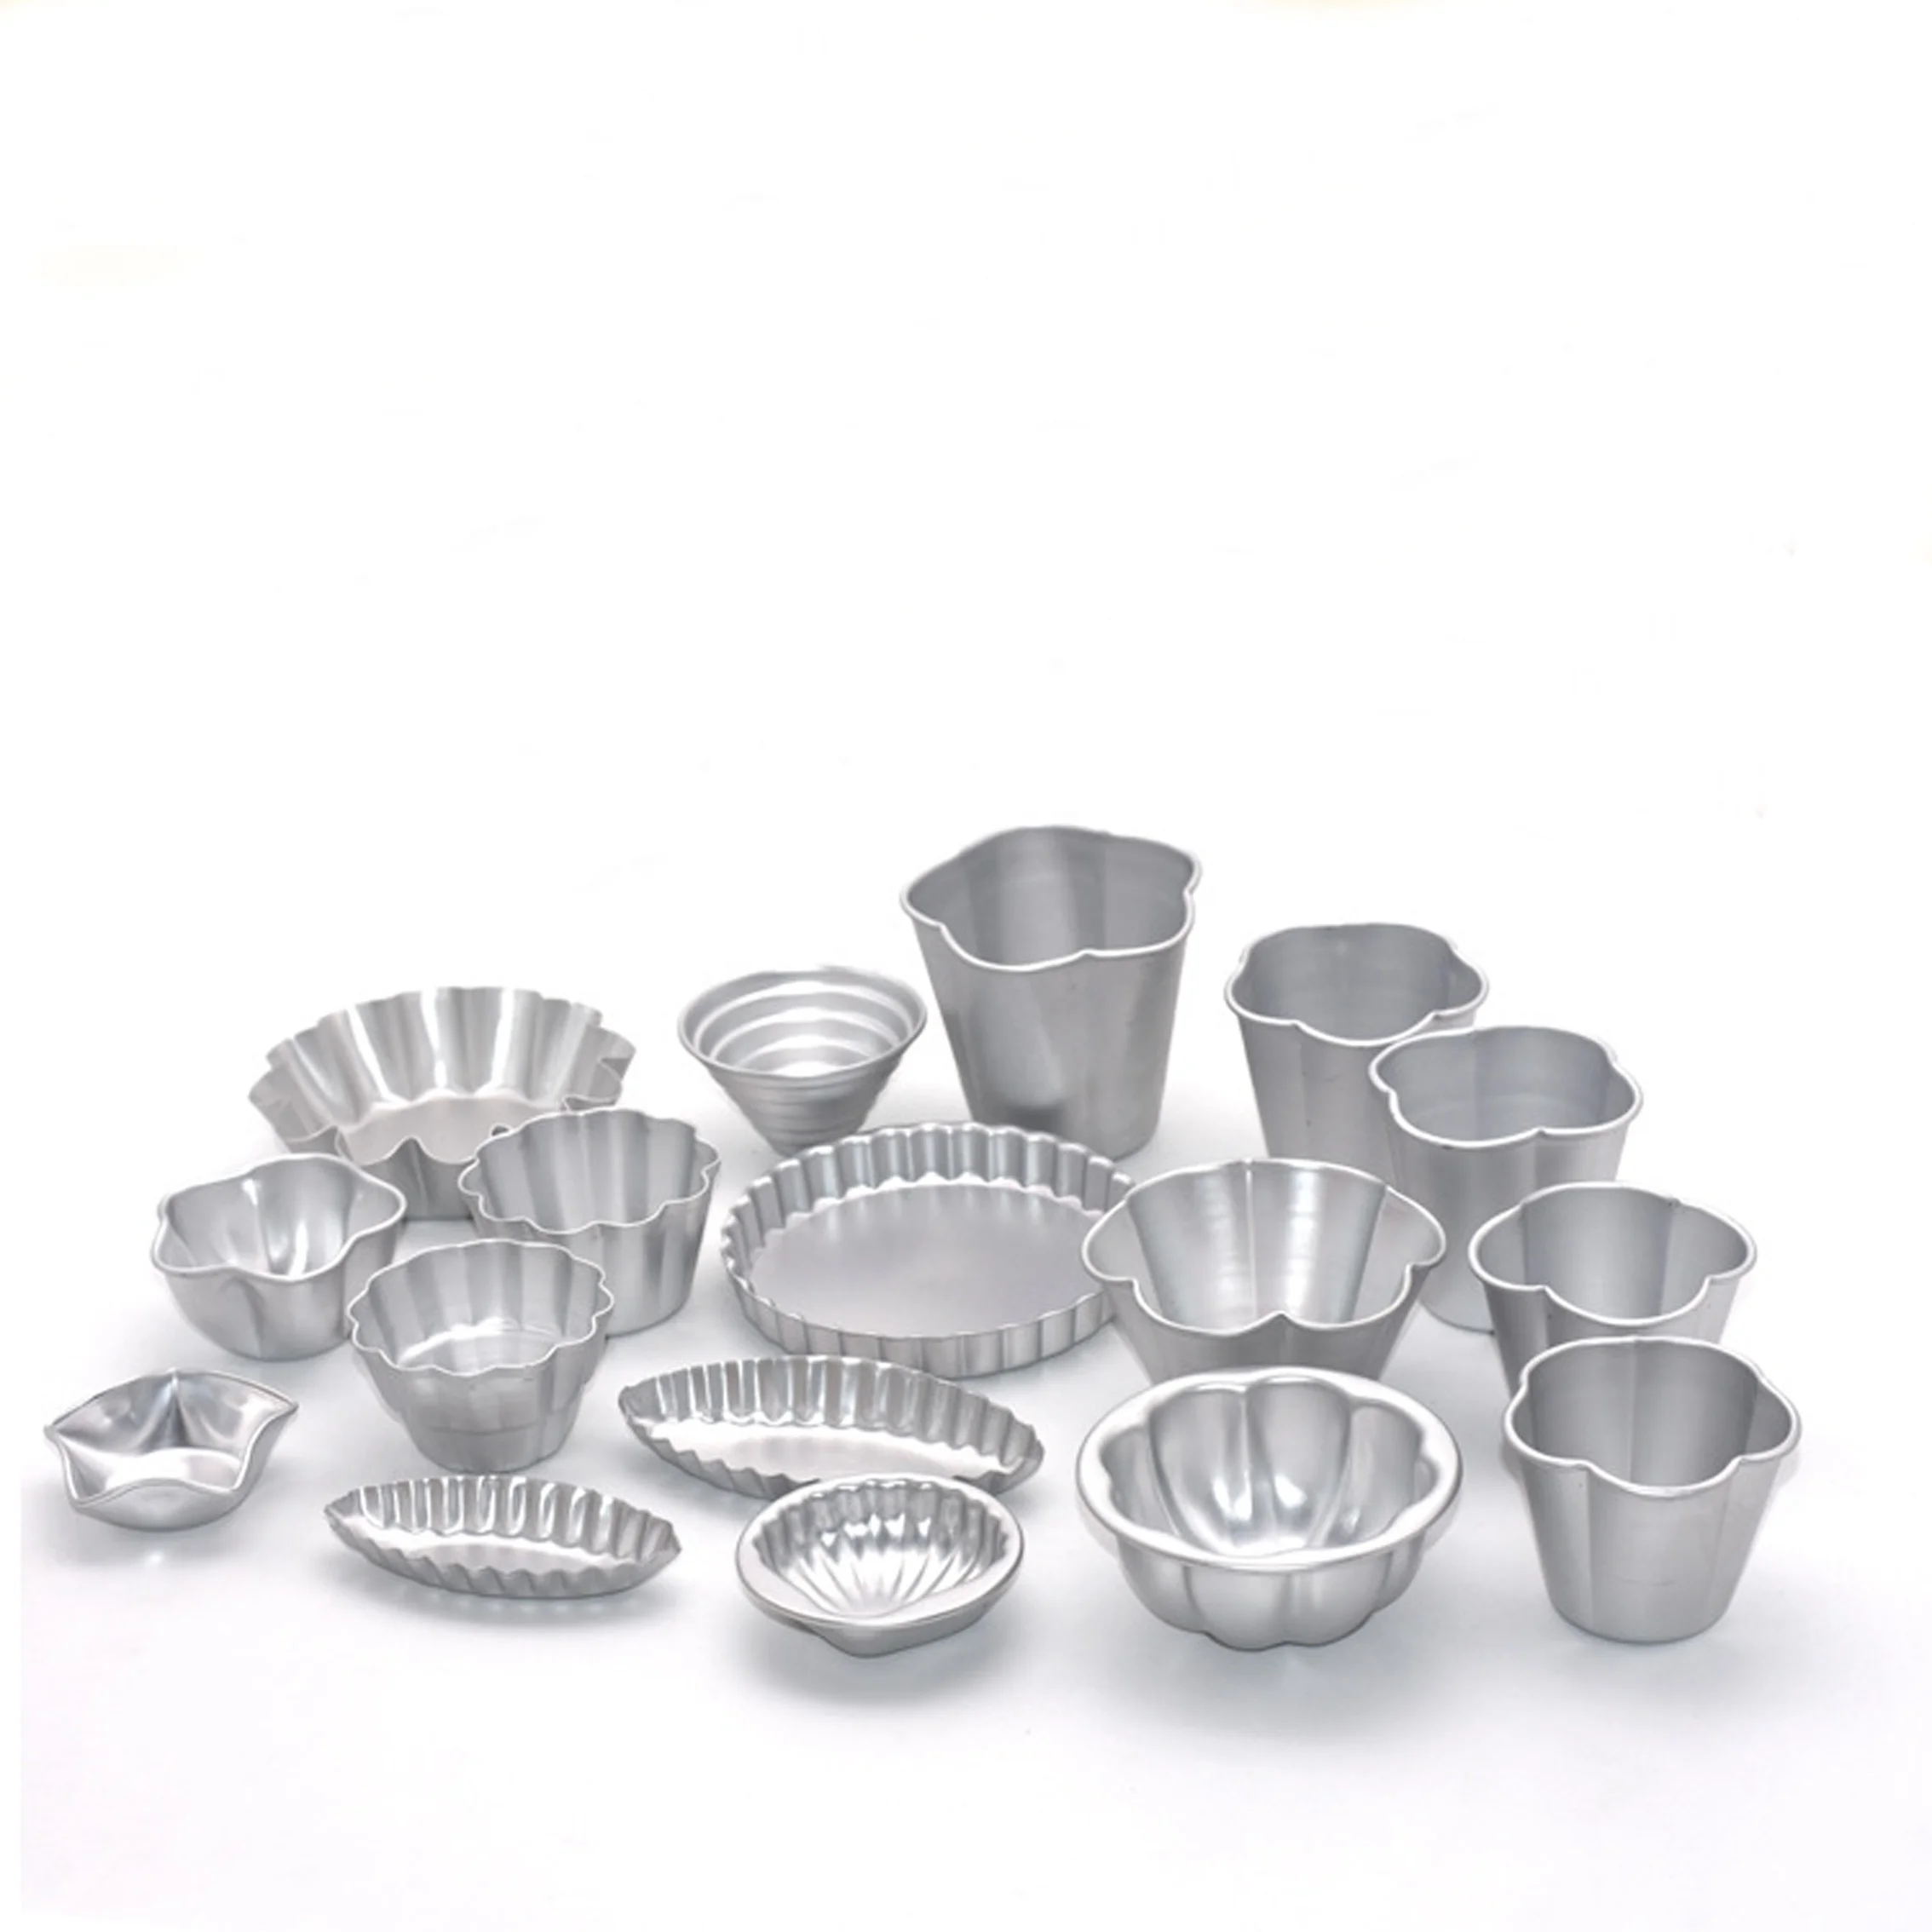 Five Stars Plum Blossom Chrysanthemum Shell Flower Shaped Cake Mold Bakeware Mold Dishes Pan kitchen accessories metal pizza pan